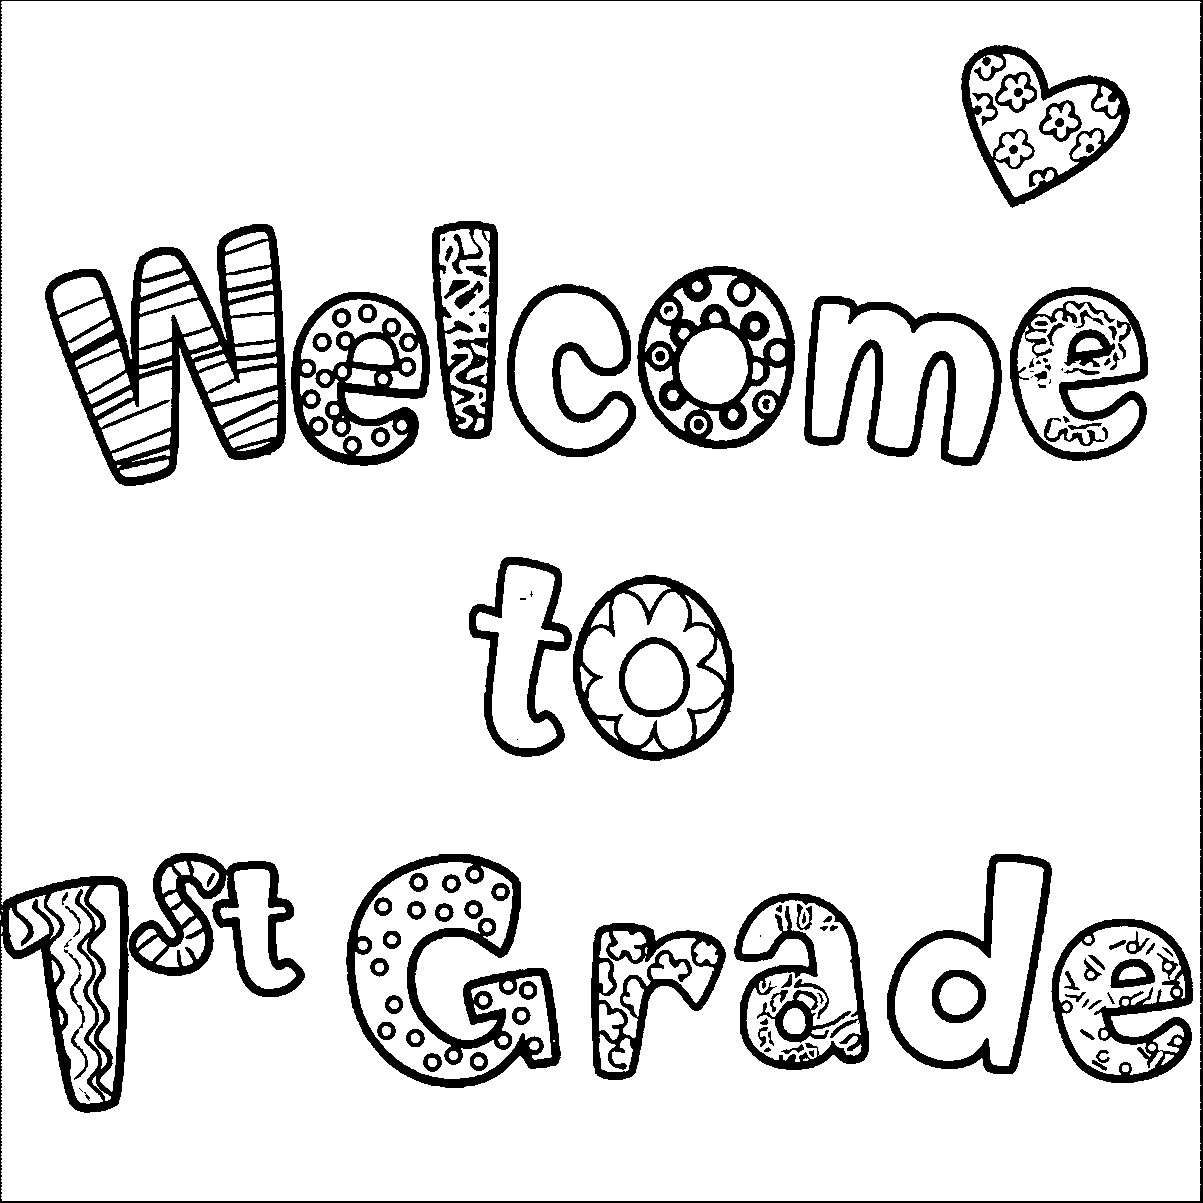 1St Grade Coloring Pages
 Subtraction Coloring Pages First Grade coloring pages